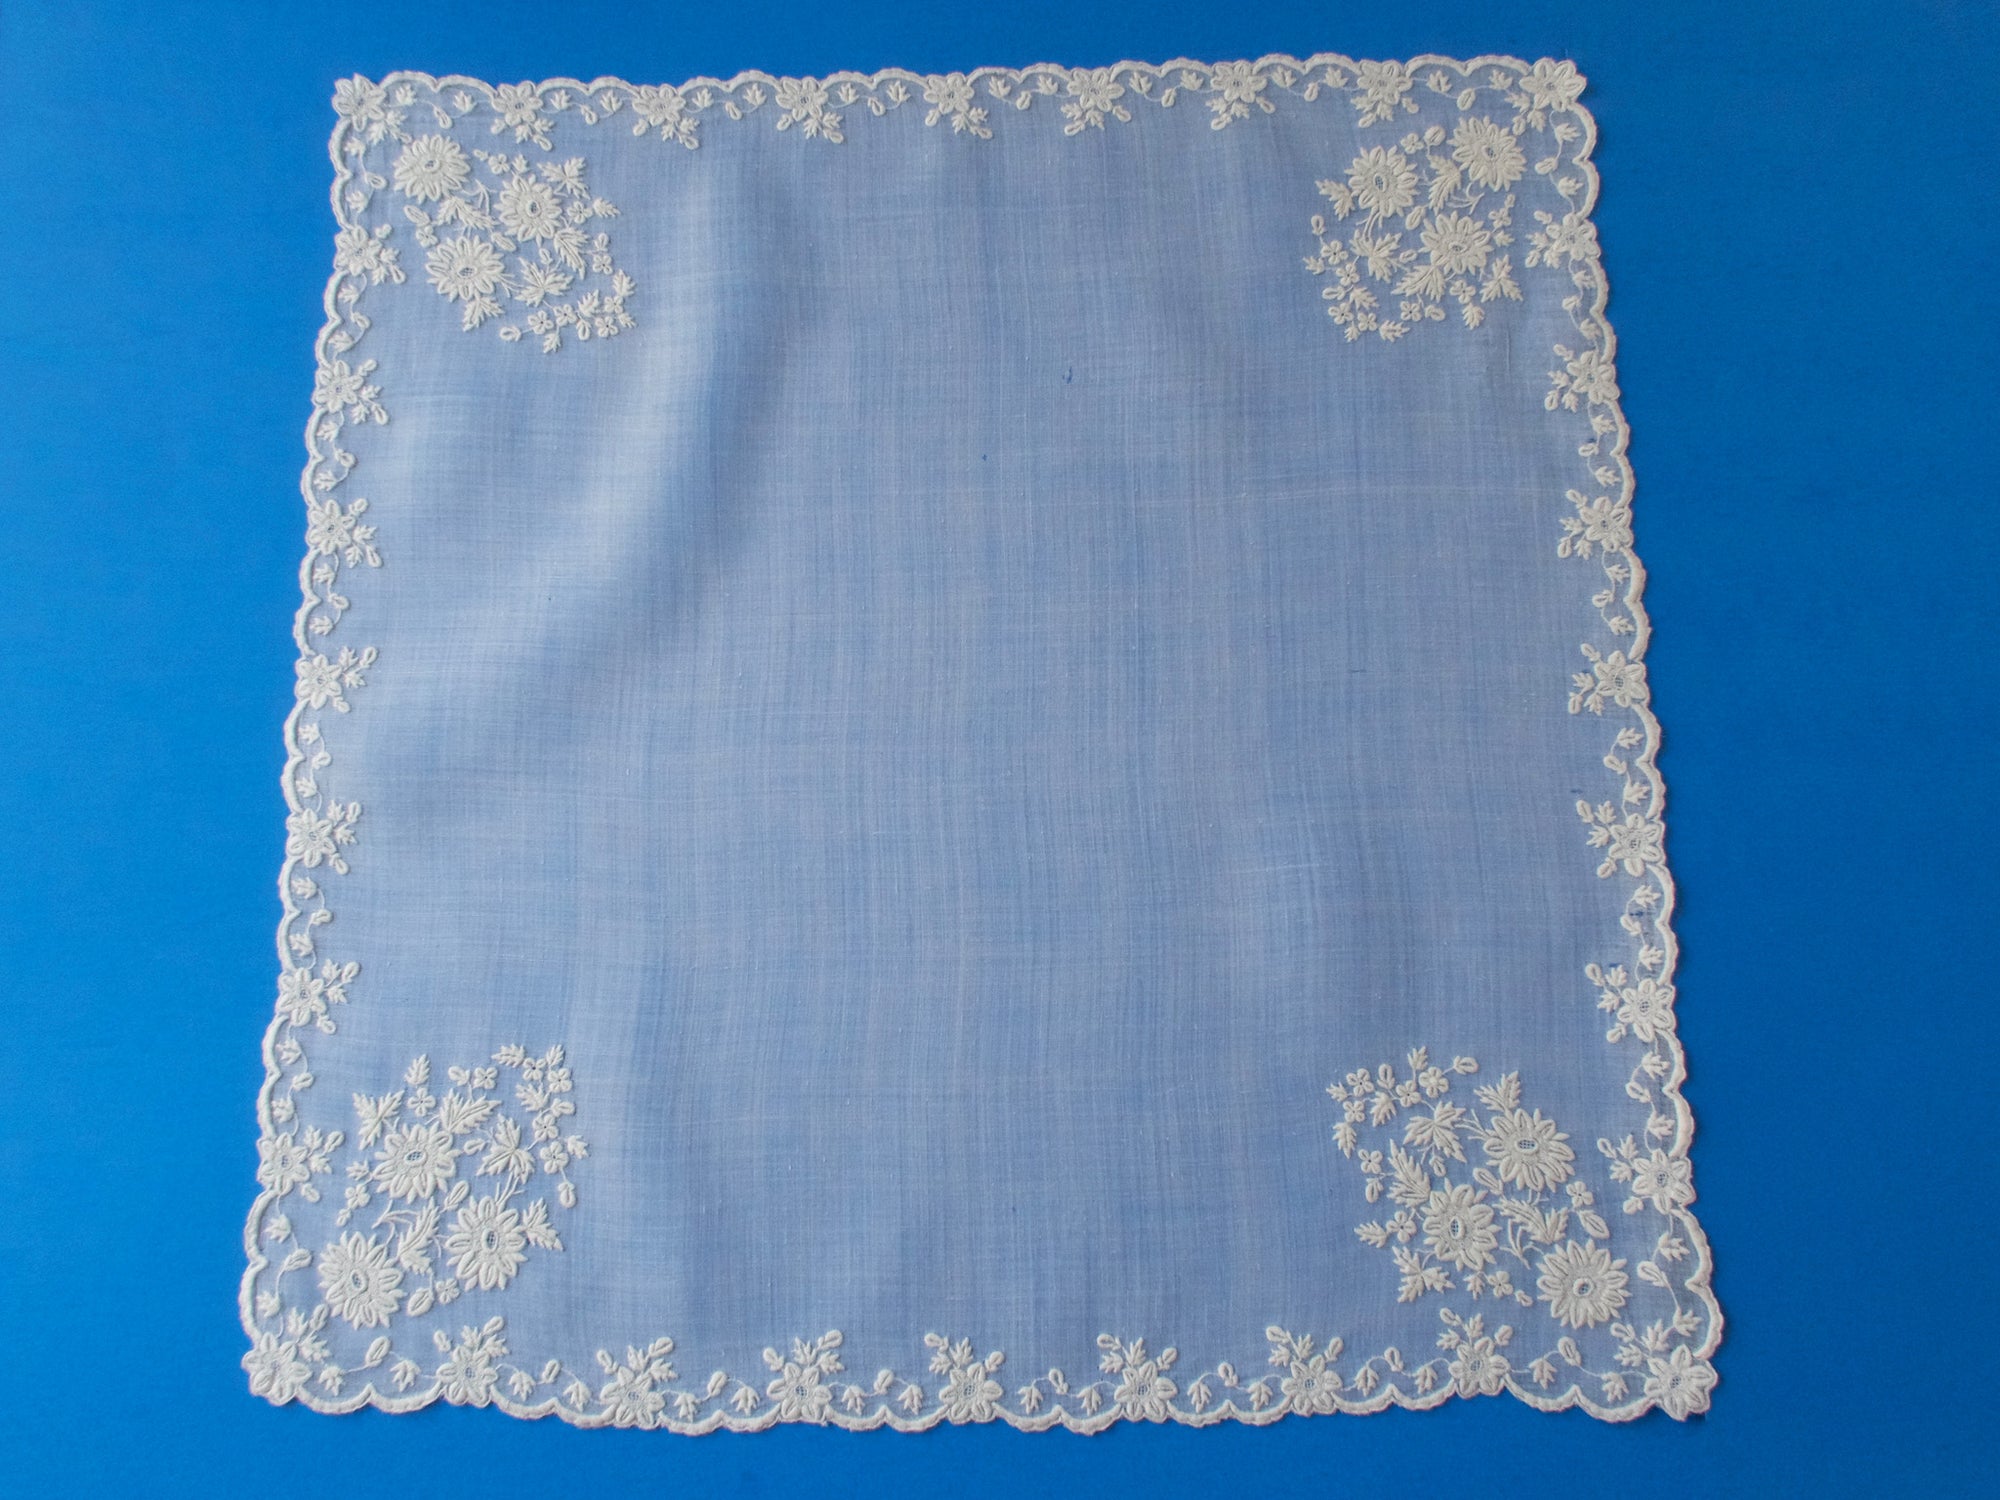 Antique 19th Century French Whitework Lace Handkerchief 17"